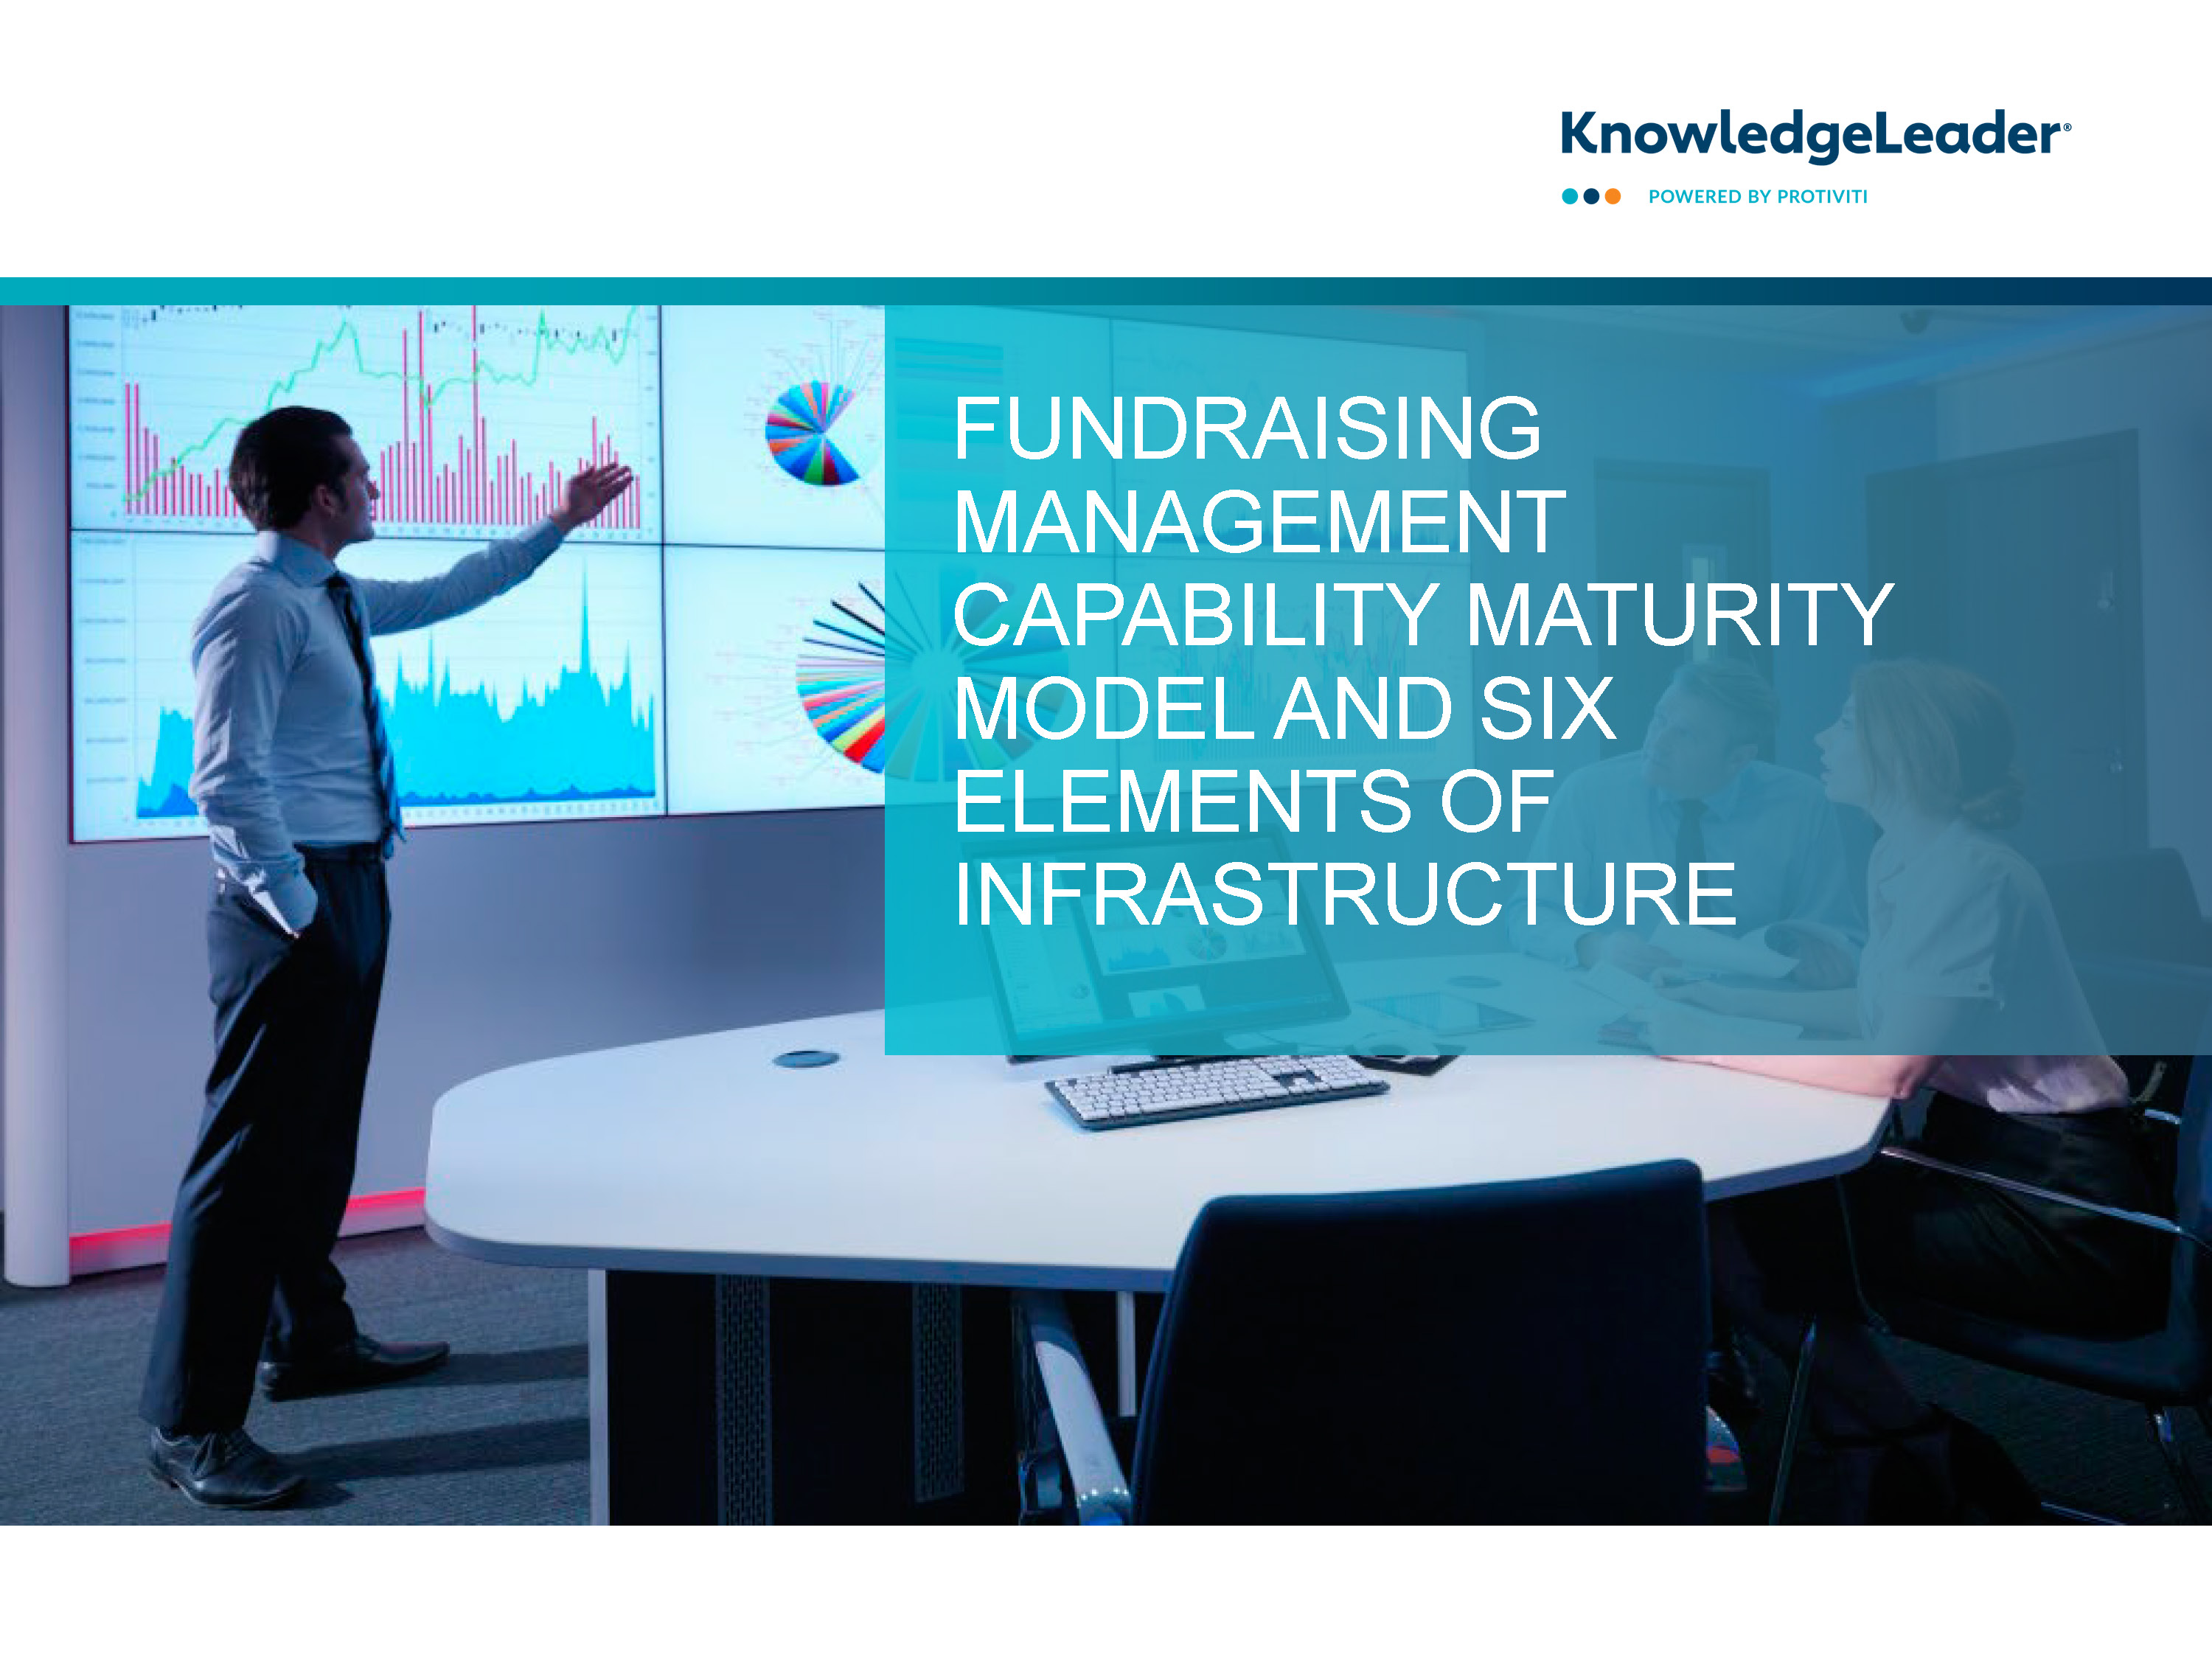 Screenshot of the first page of Fundraising Management Capability Maturity Model